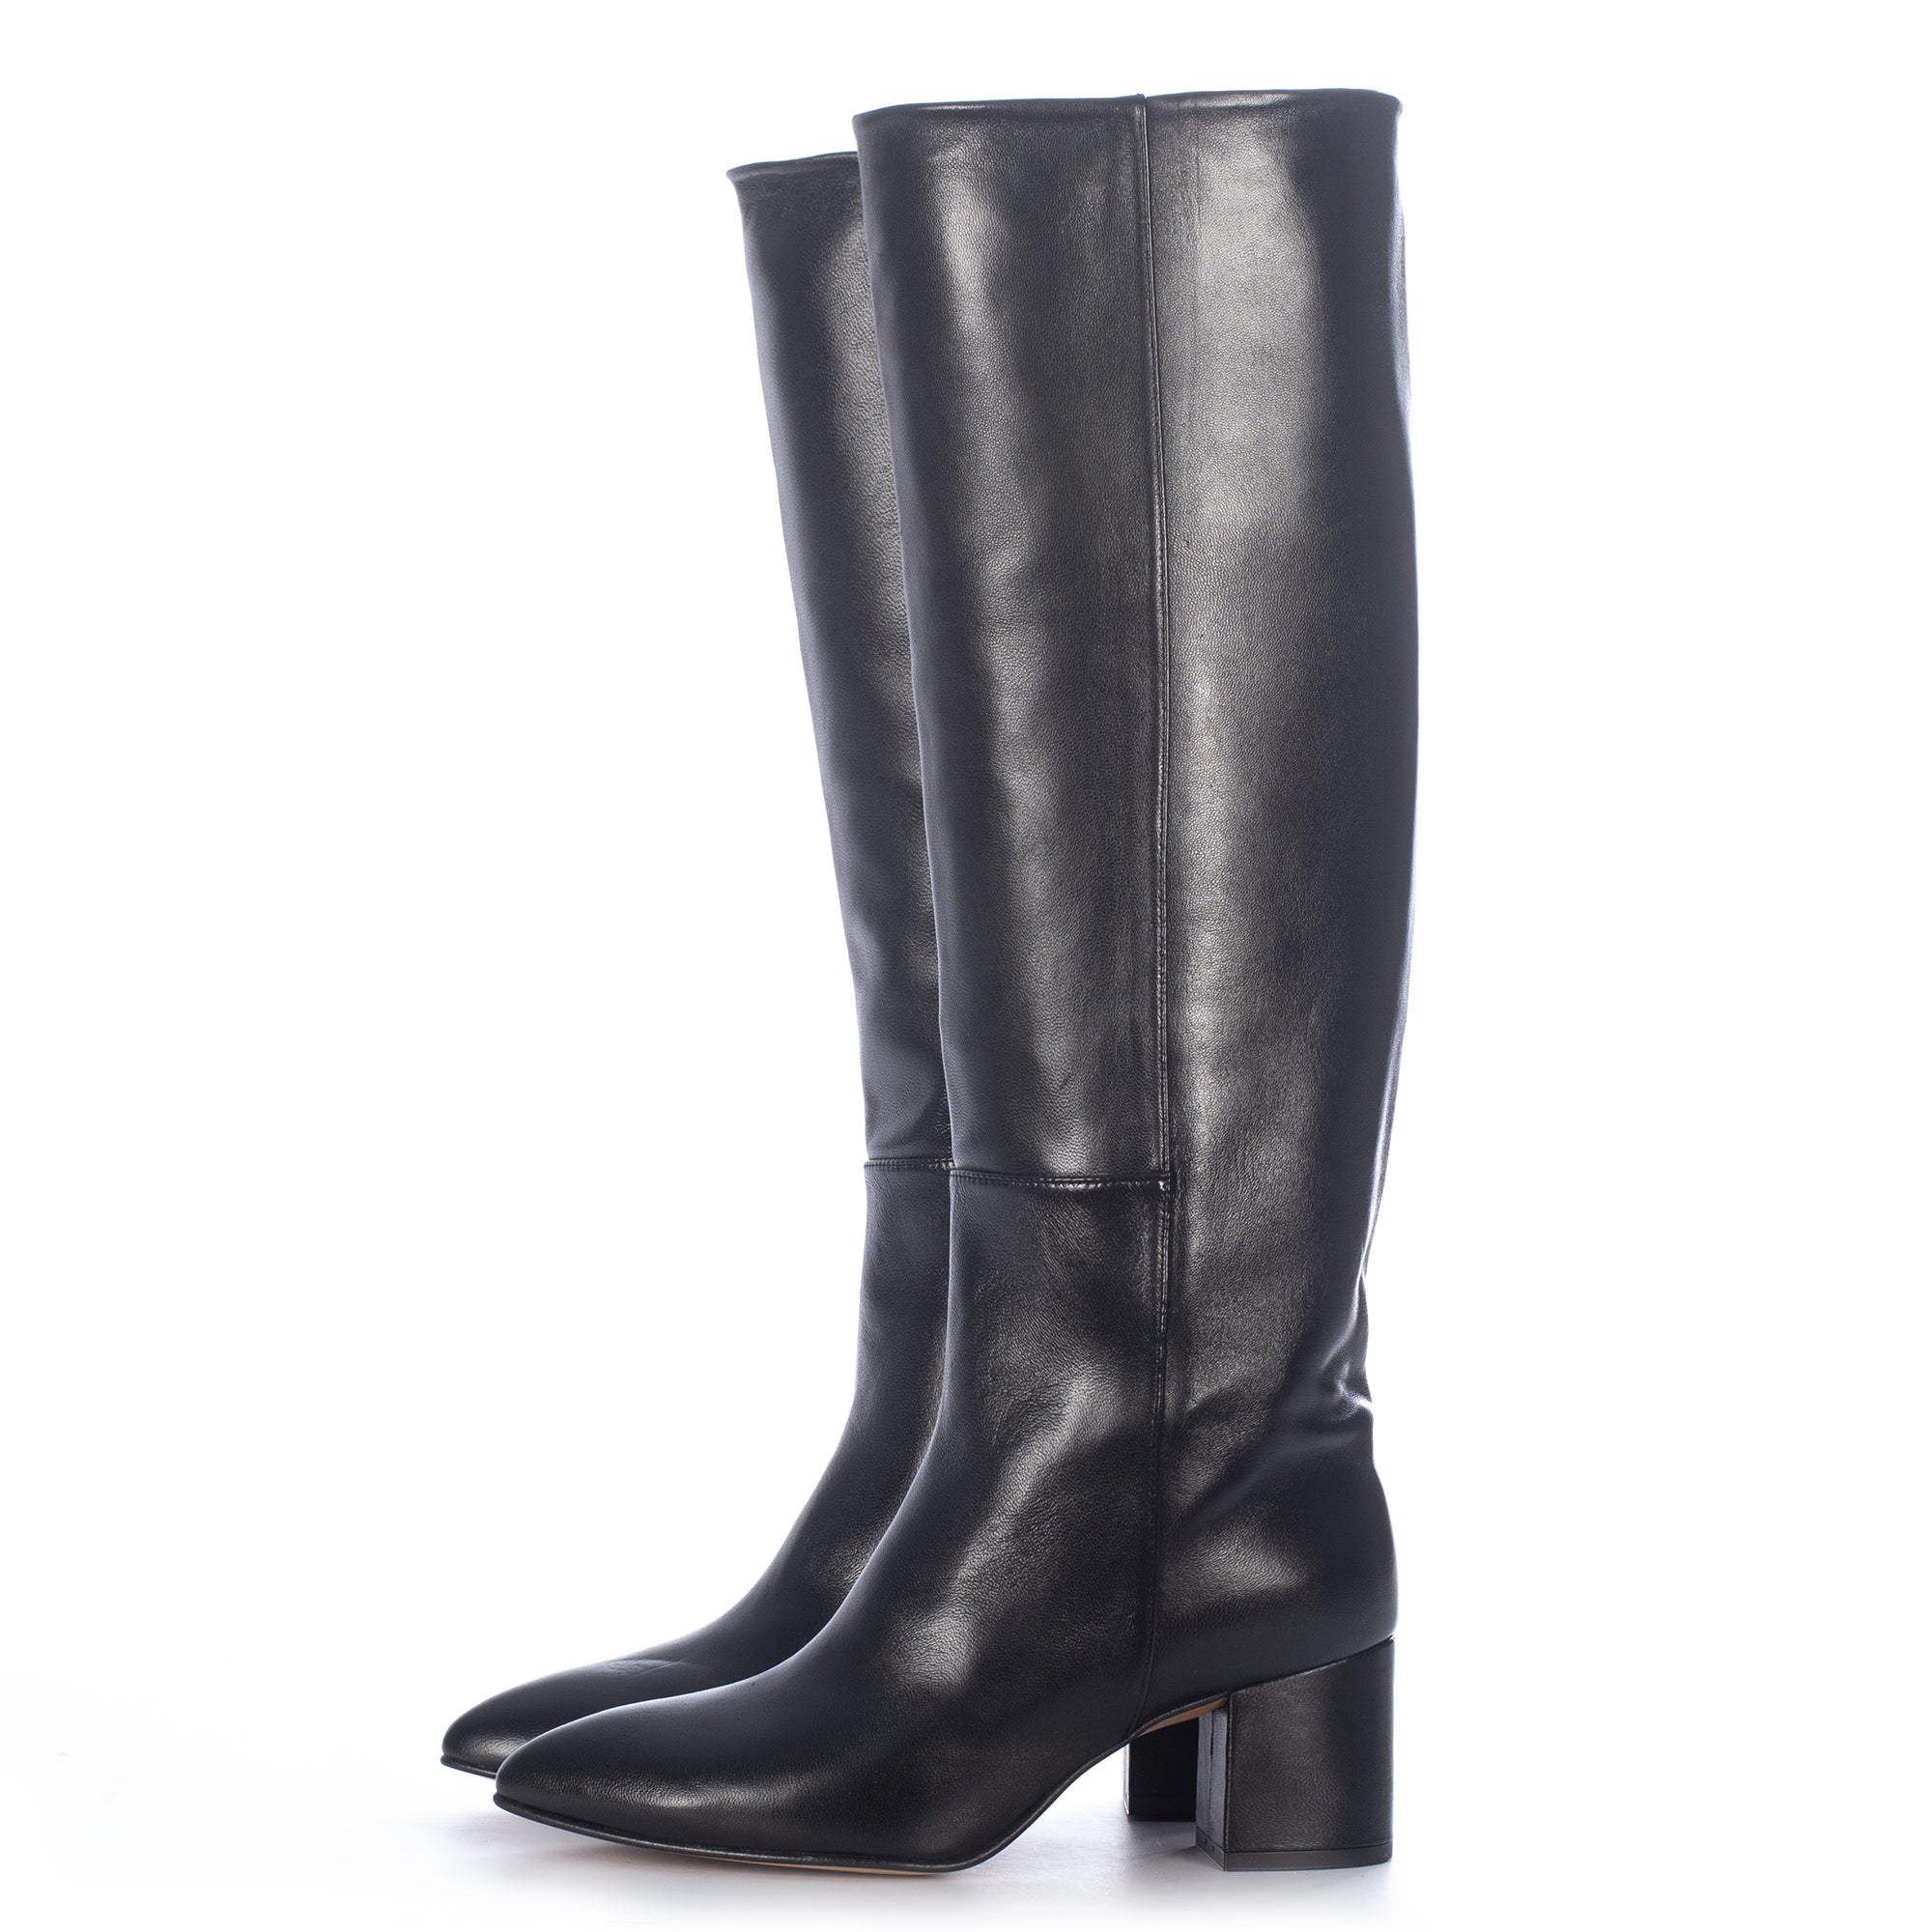 BLACK LEATHER TALL BOOTS